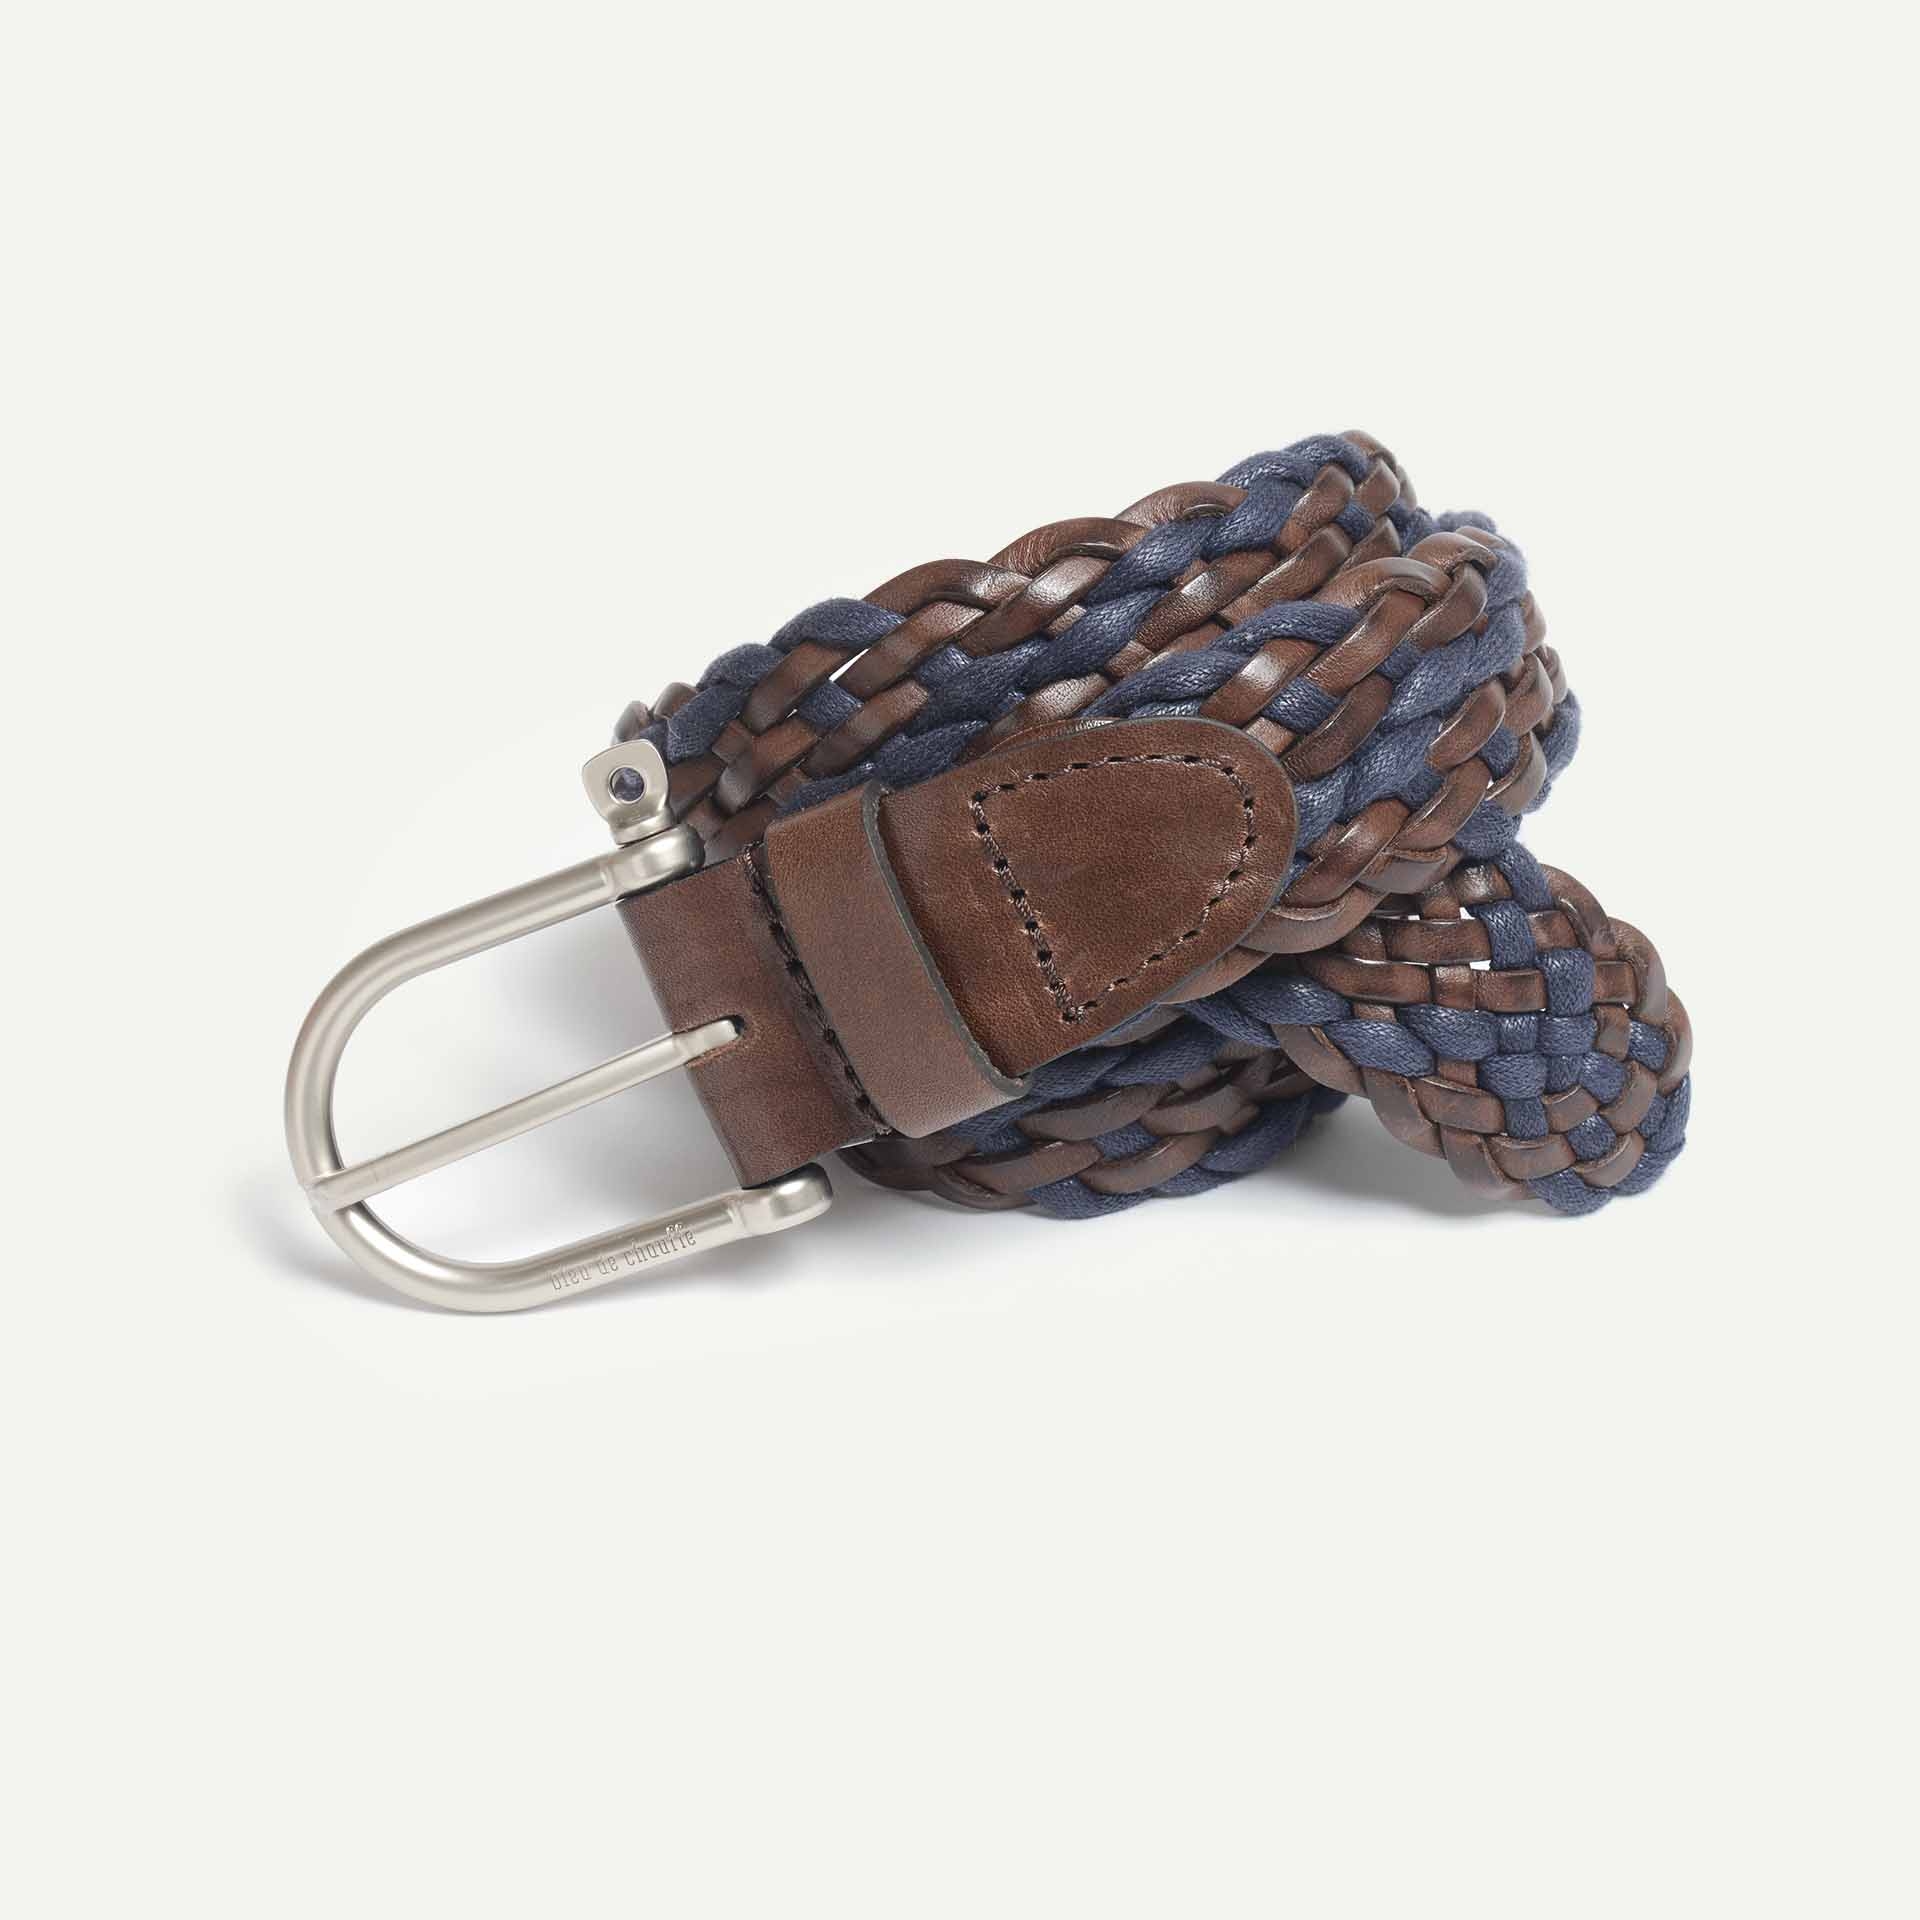 Manille Belt / braided leather - Blue Palissandre (image n°1)